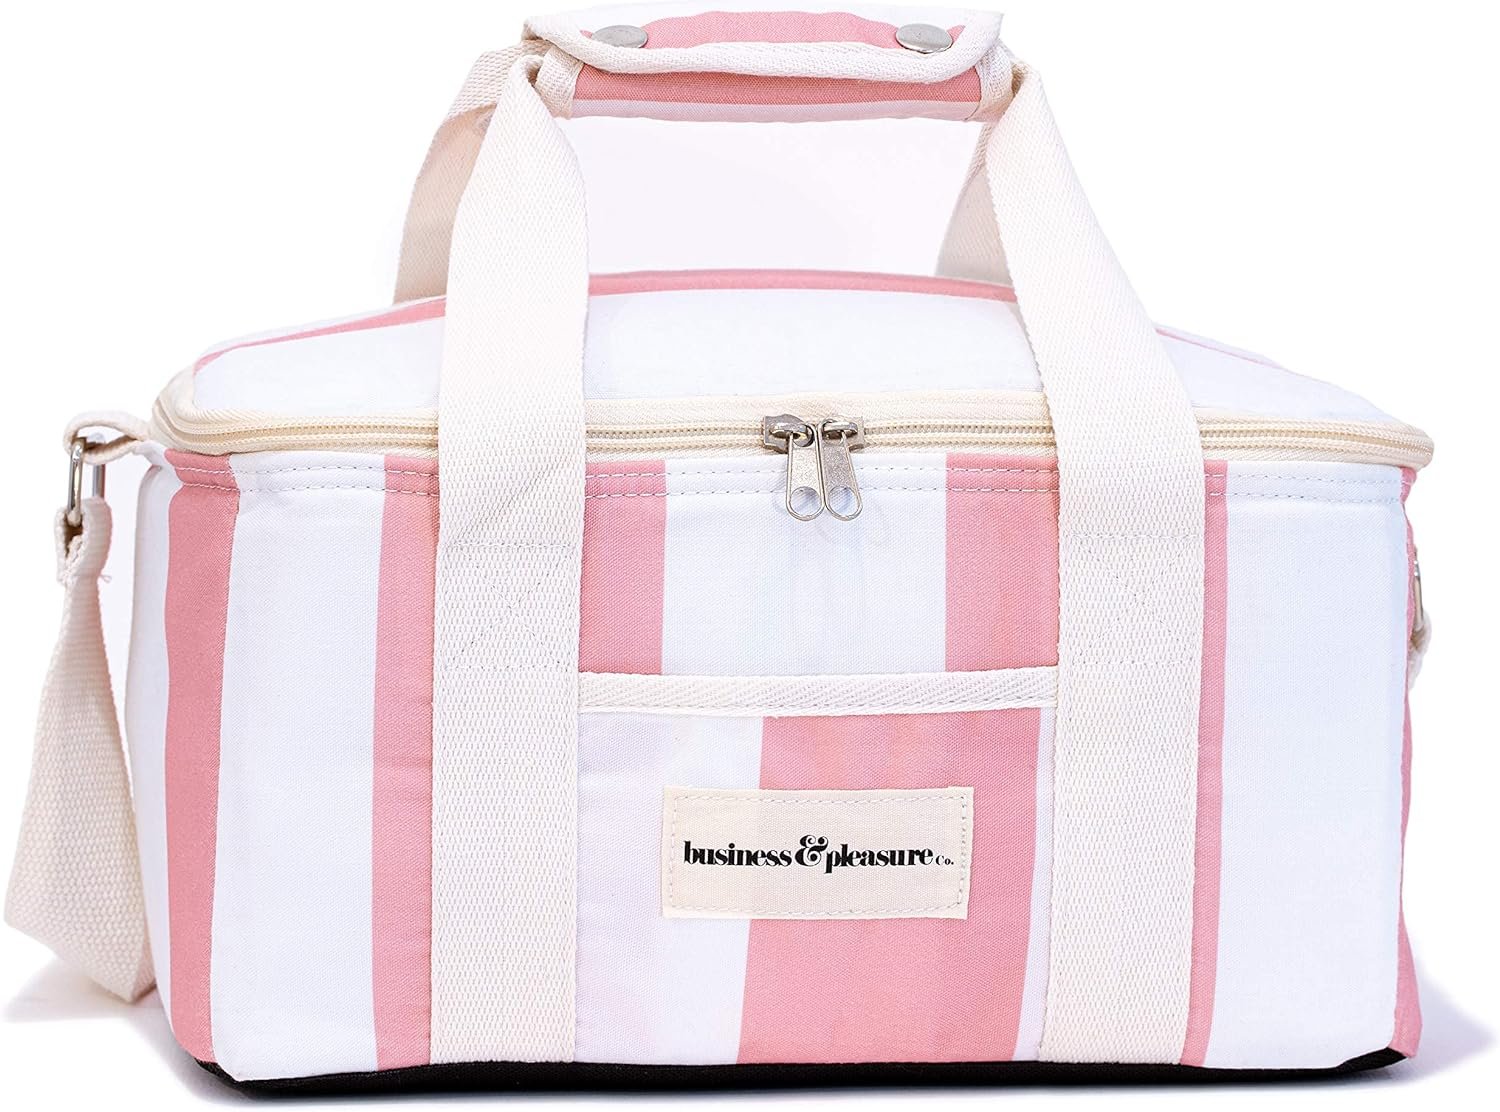 business-pleasure-co-holiday-cooler-bag-review